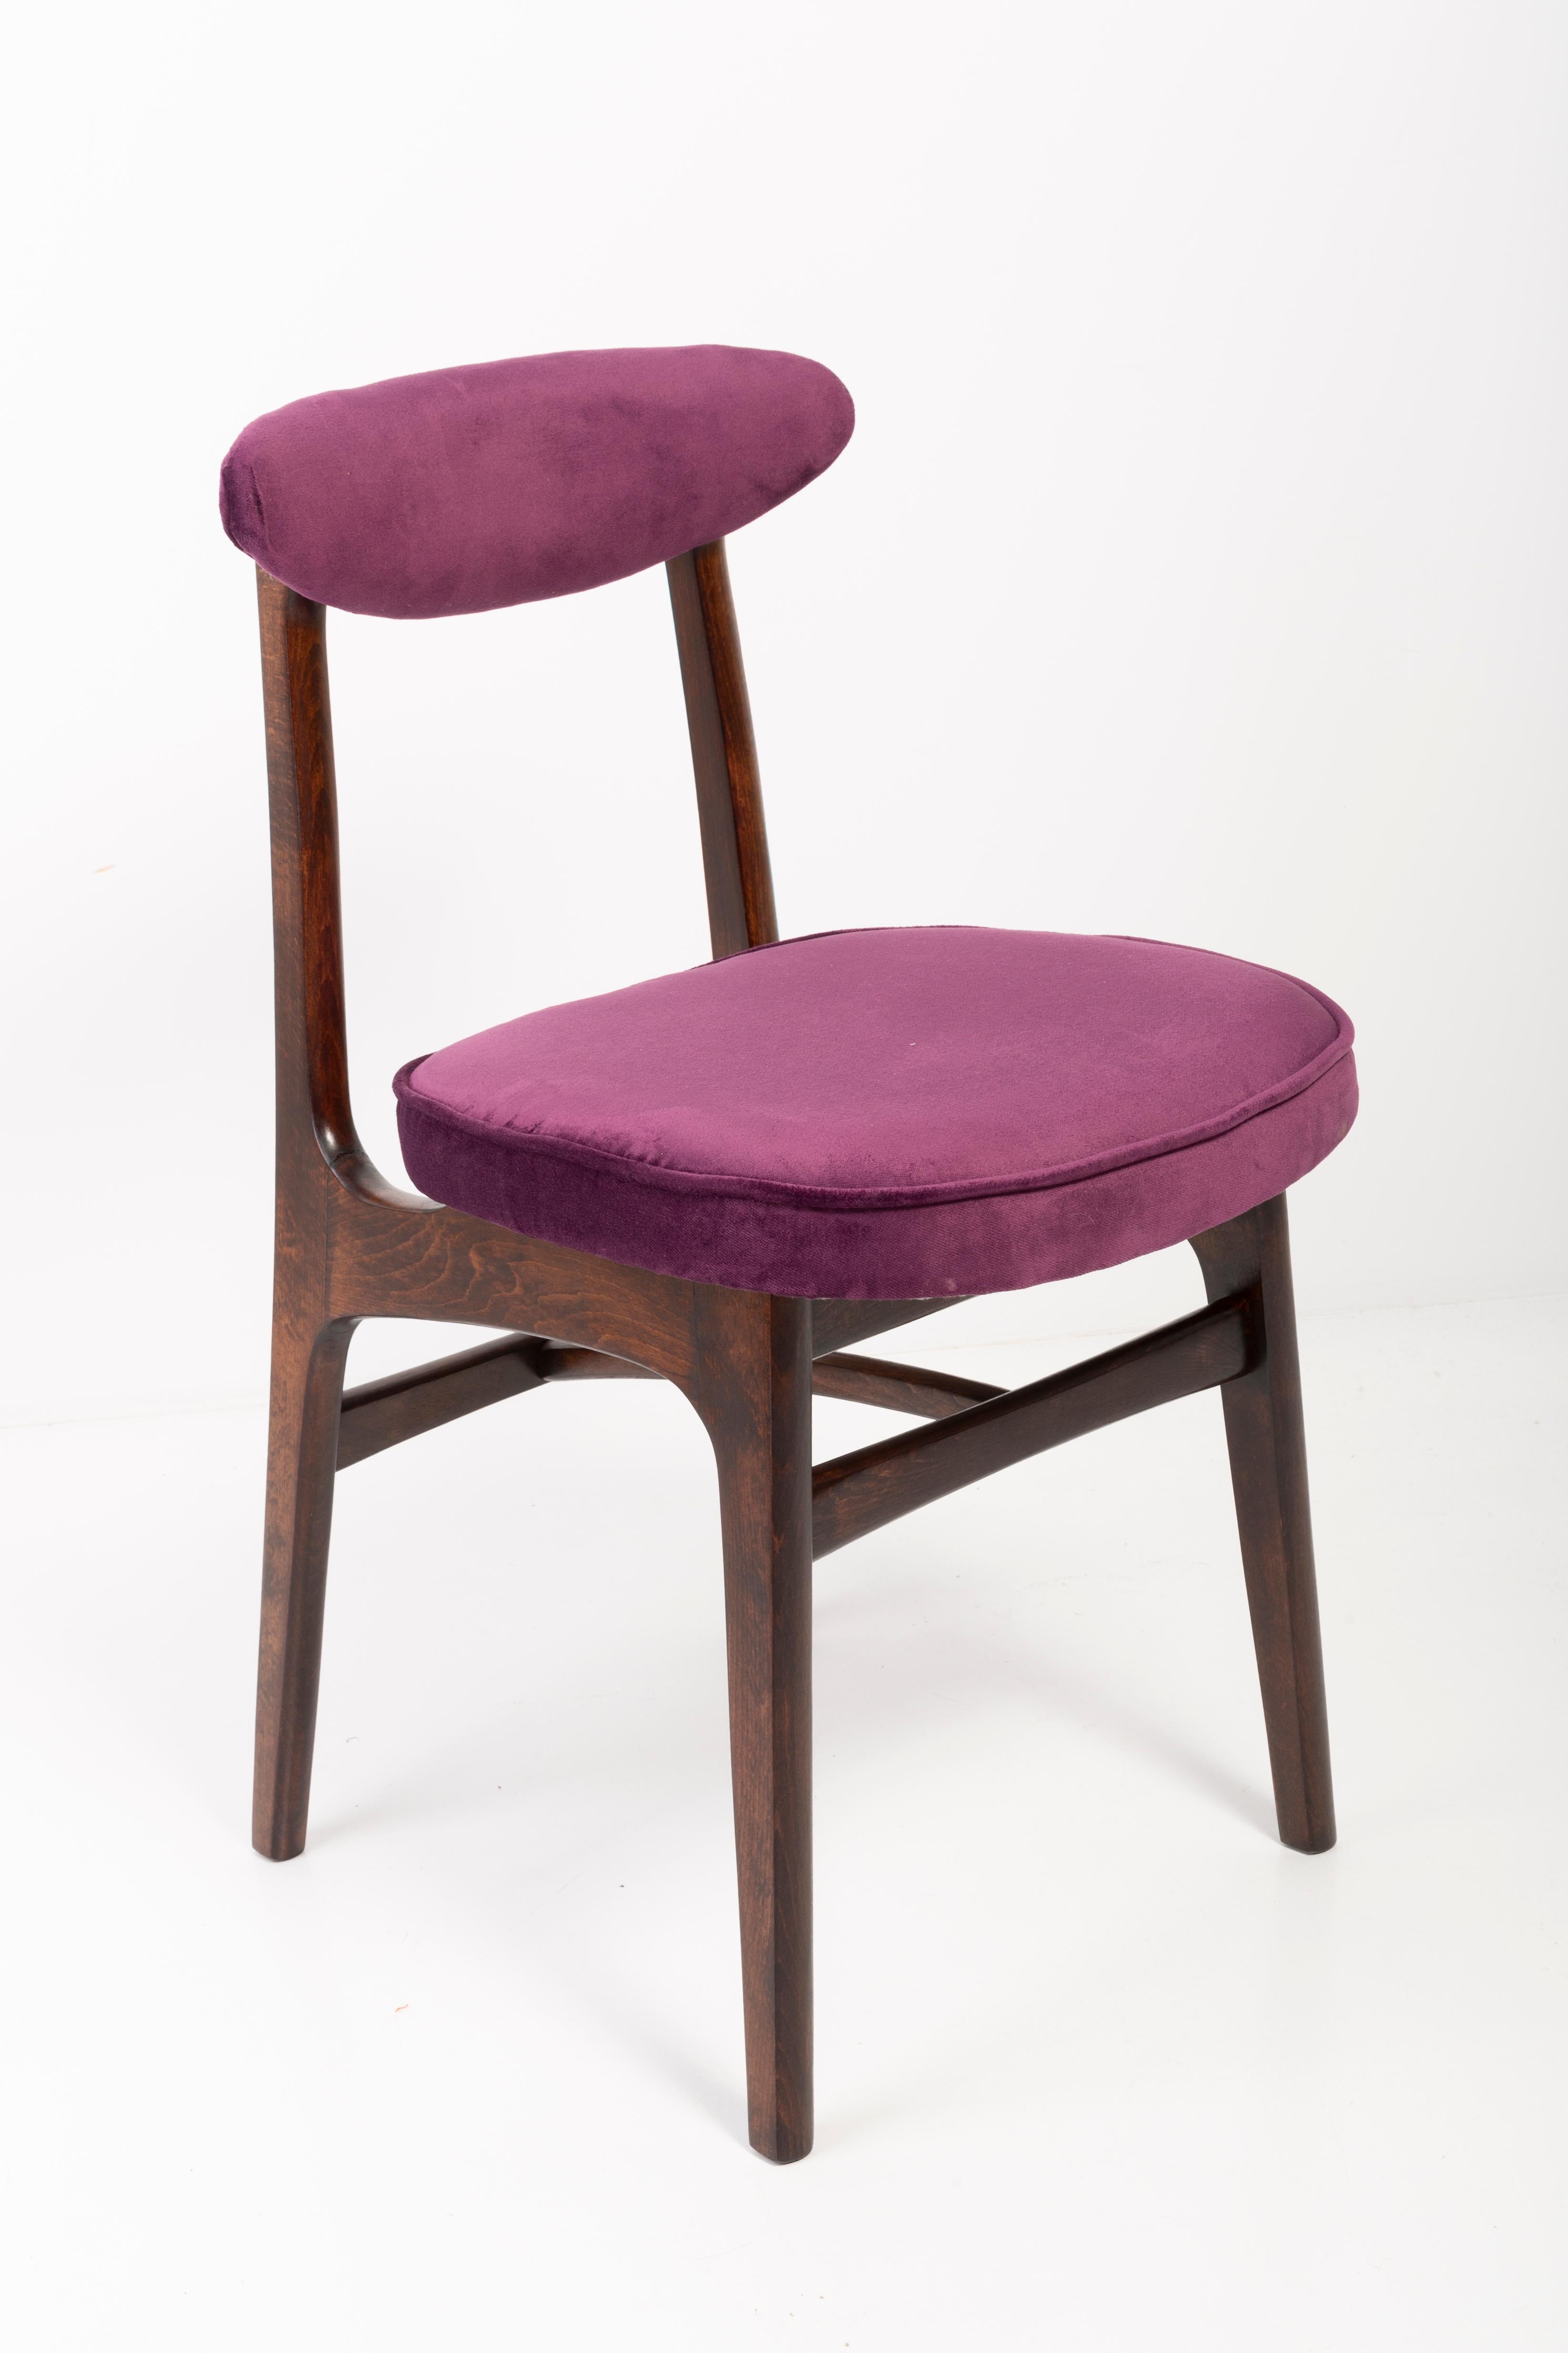 Chairs designed by Prof. Rajmund Halas. It has been made of beechwood. Chairs are after undergone a complete upholstery renovation, the woodwork has been refreshed. Seats and backs were dressed in a plum (color 969), durable and pleasant to the